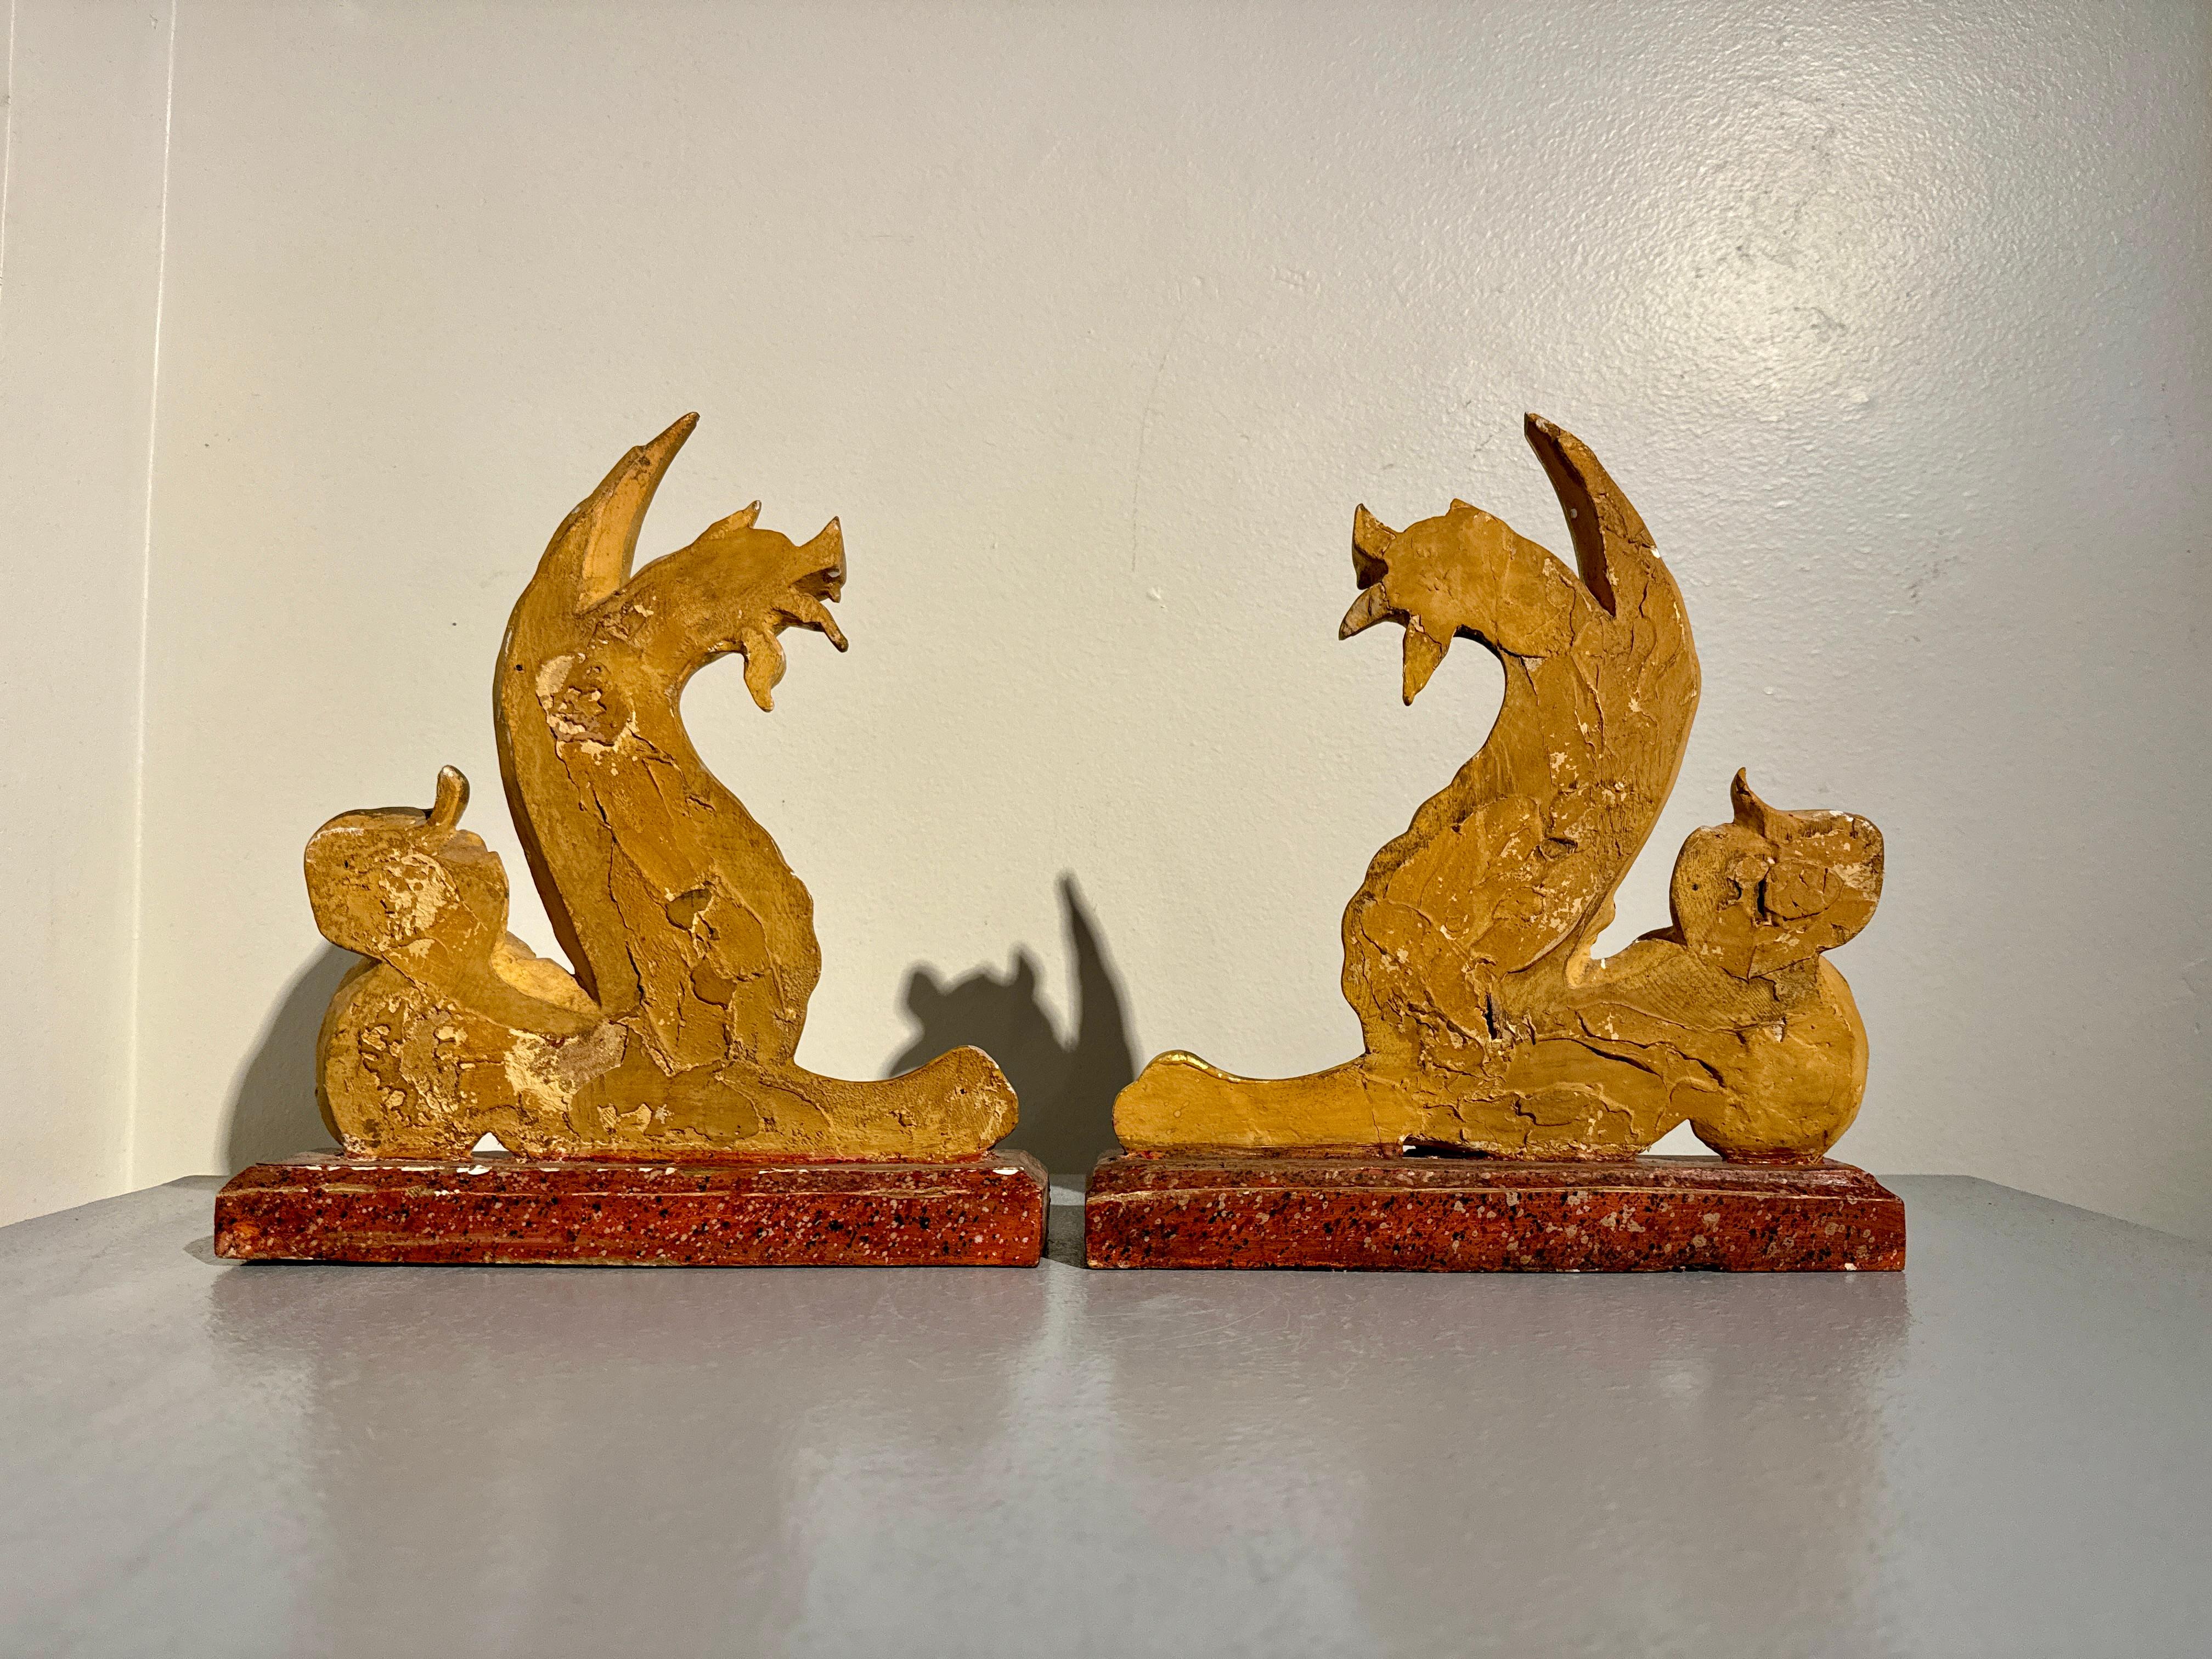 19th Century Pair Italian Neoclassical Craved and Gilt Wood Mythical Beasts, mid 19th century For Sale